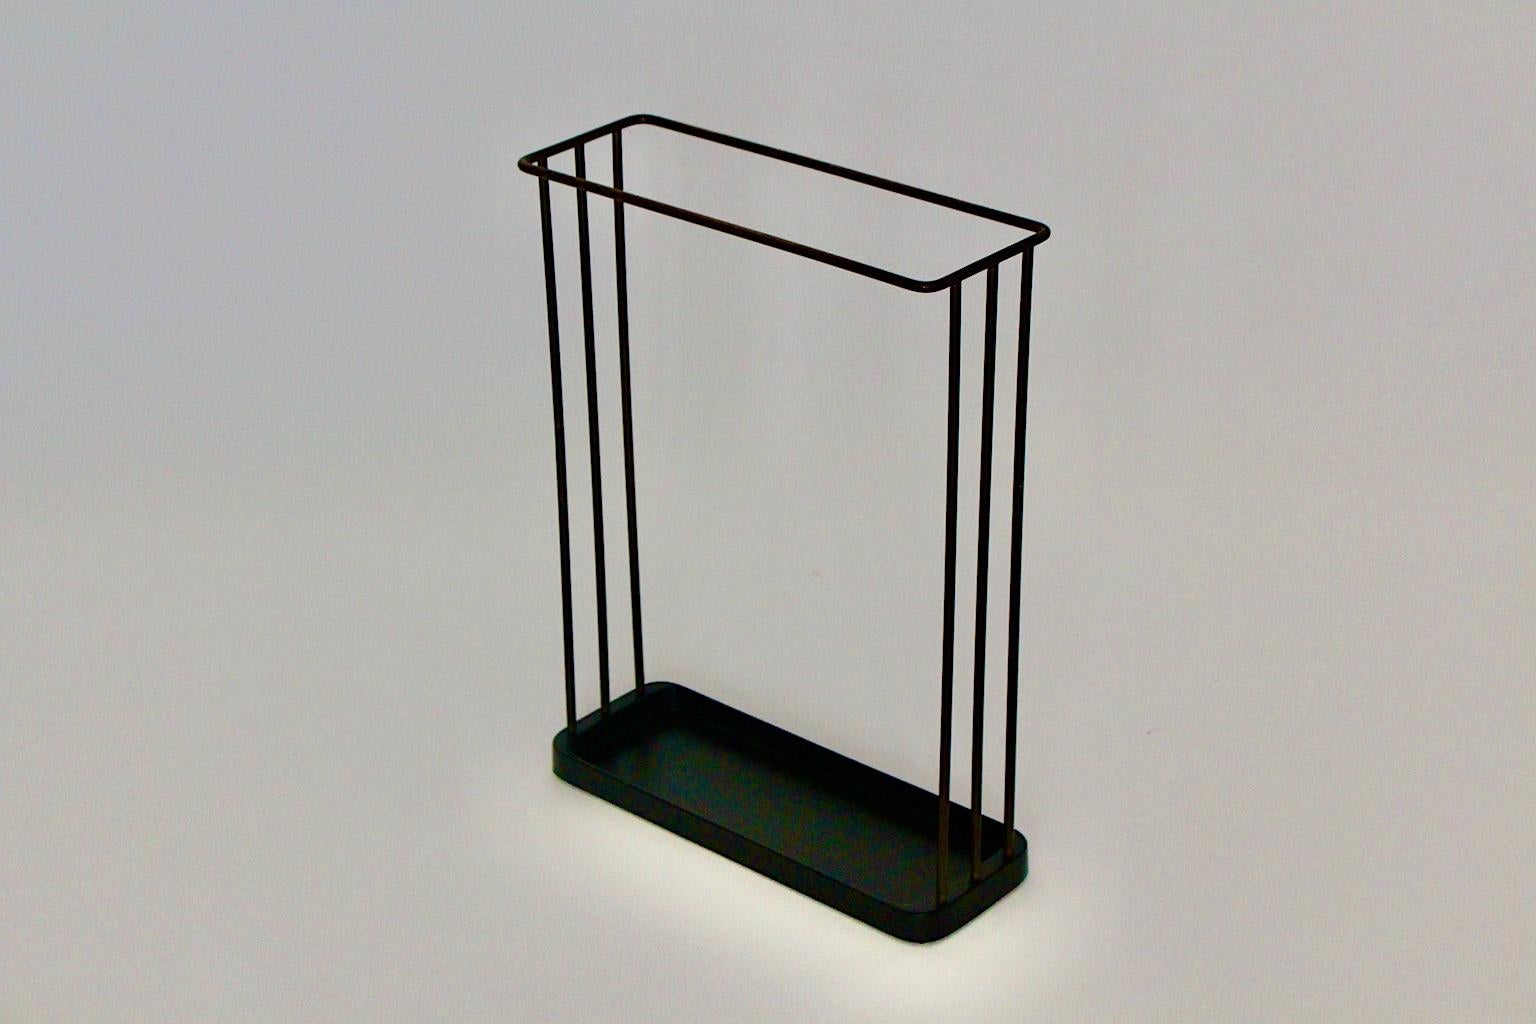 A Mid-Century Modern vintage black brass umbrella stand by Franz Hagenauer  for Workshop Hagenauer, 1950s, Austria.
Franz Hagenauer (  1906 - 1986 )
A gorgeous umbrella stand from black lacquered cast iron with a solid brass construction.
This